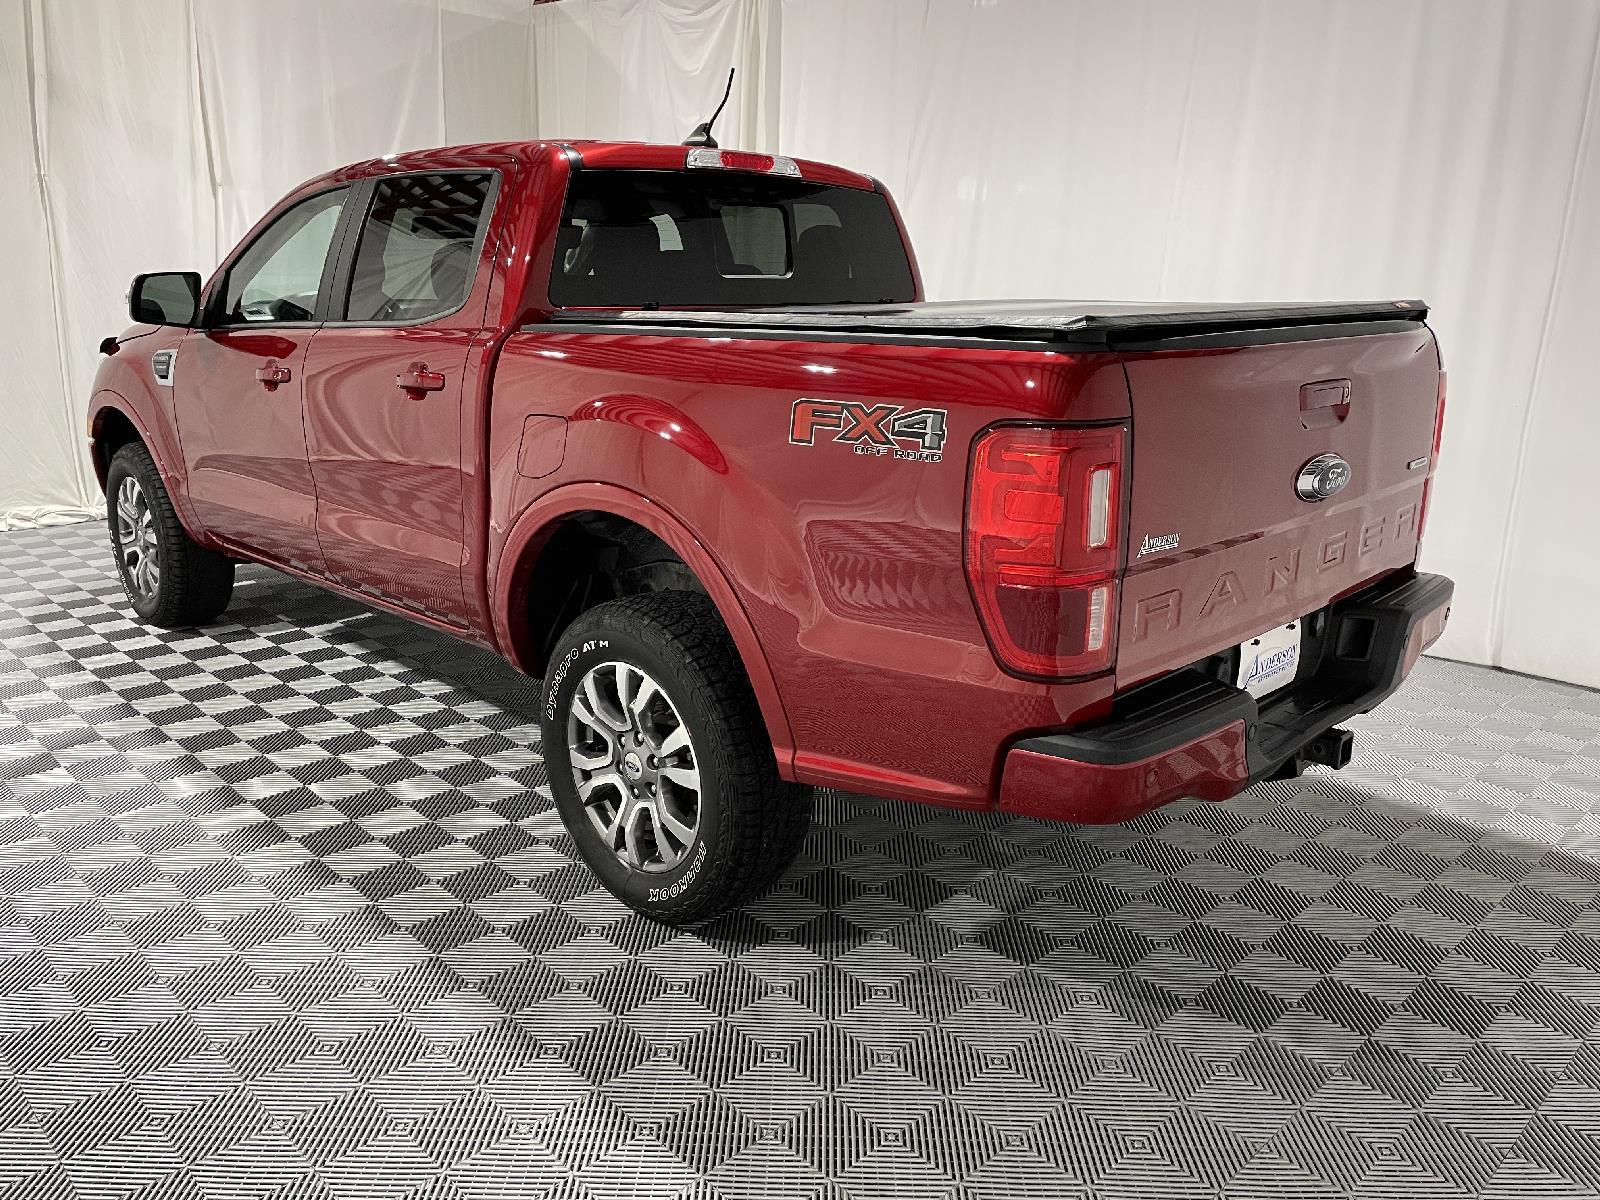 Used 2020 Ford Ranger Lariat Crew Cab Truck for sale in St Joseph MO